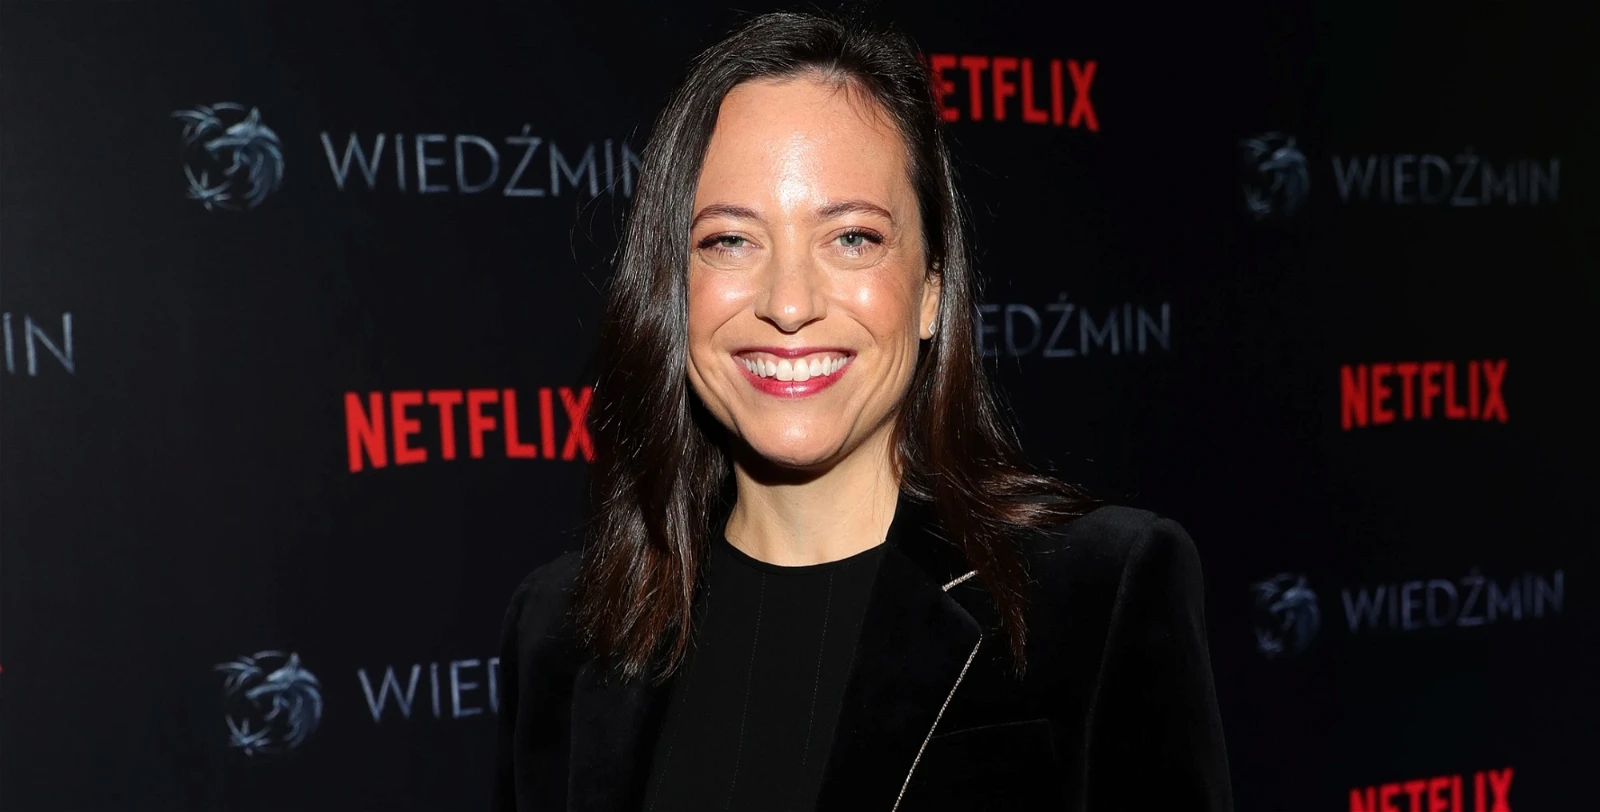 Lauren Hissrich is the showrunner of The Witcher series.